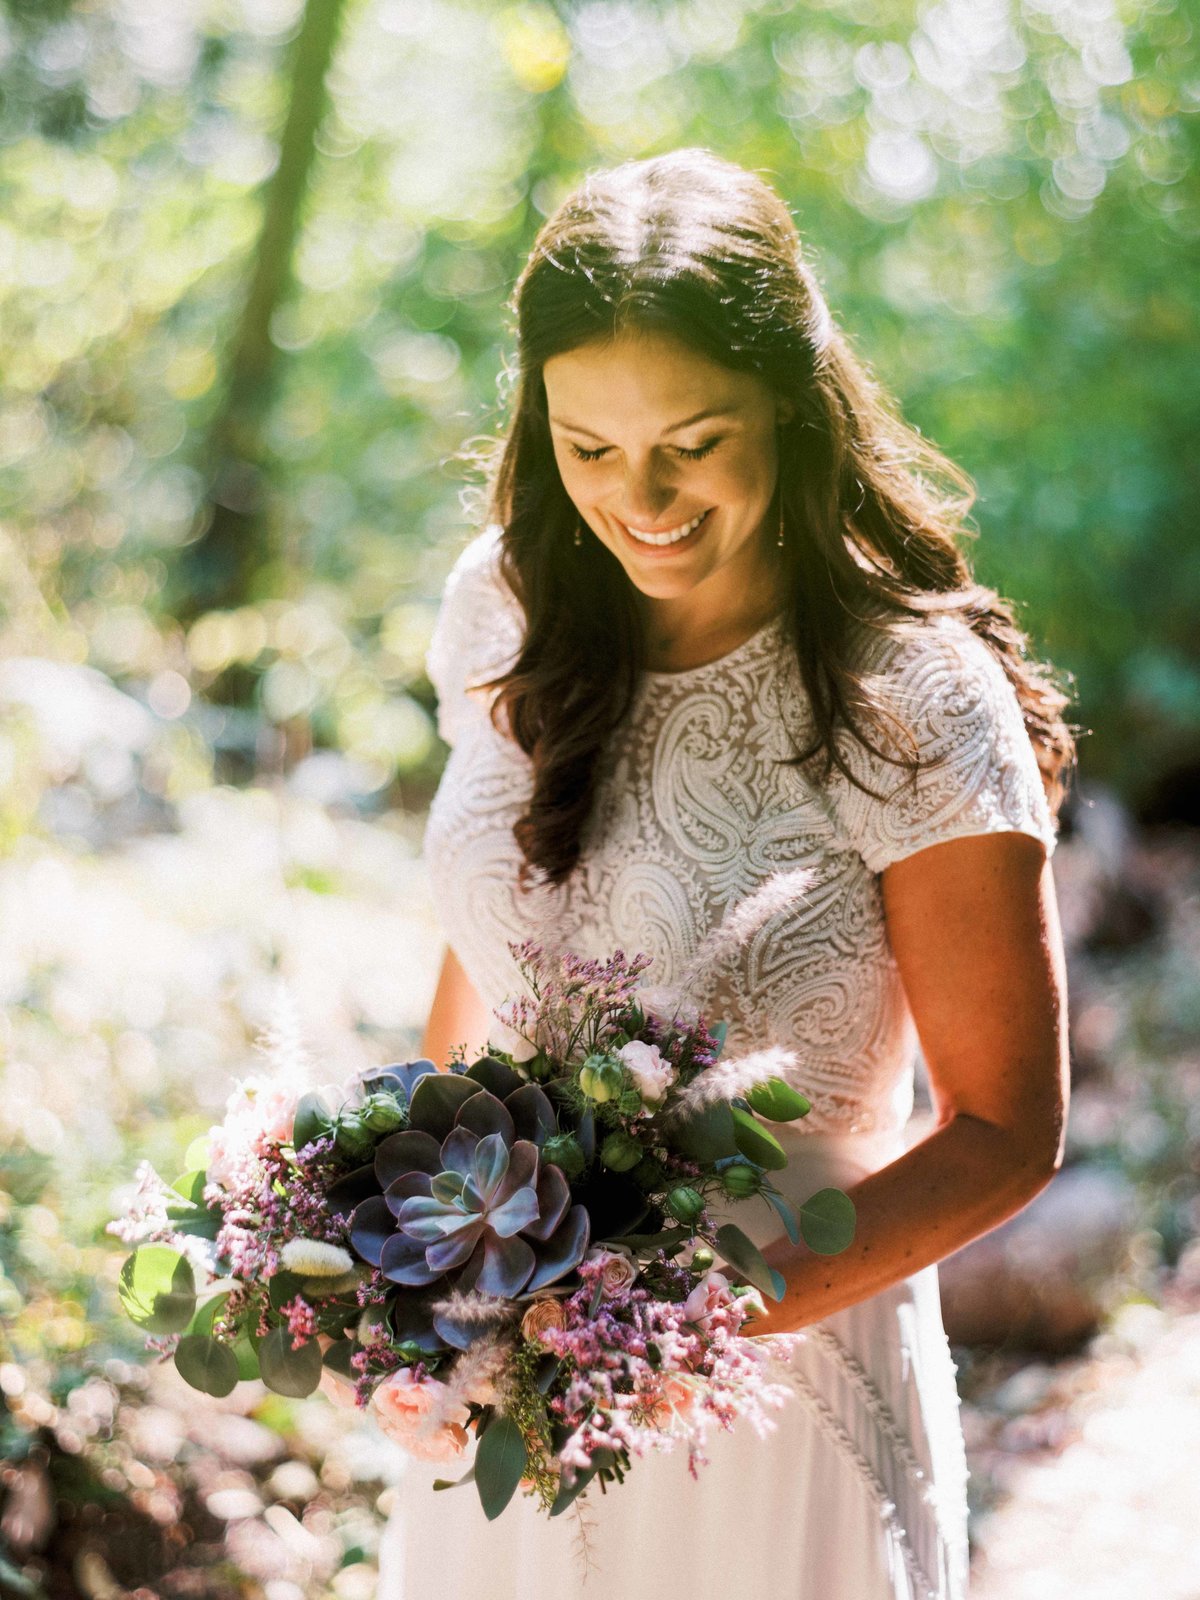 Our beautiful bride in the sun holding a bouquet of succulents, grasses, pods and spray roses.